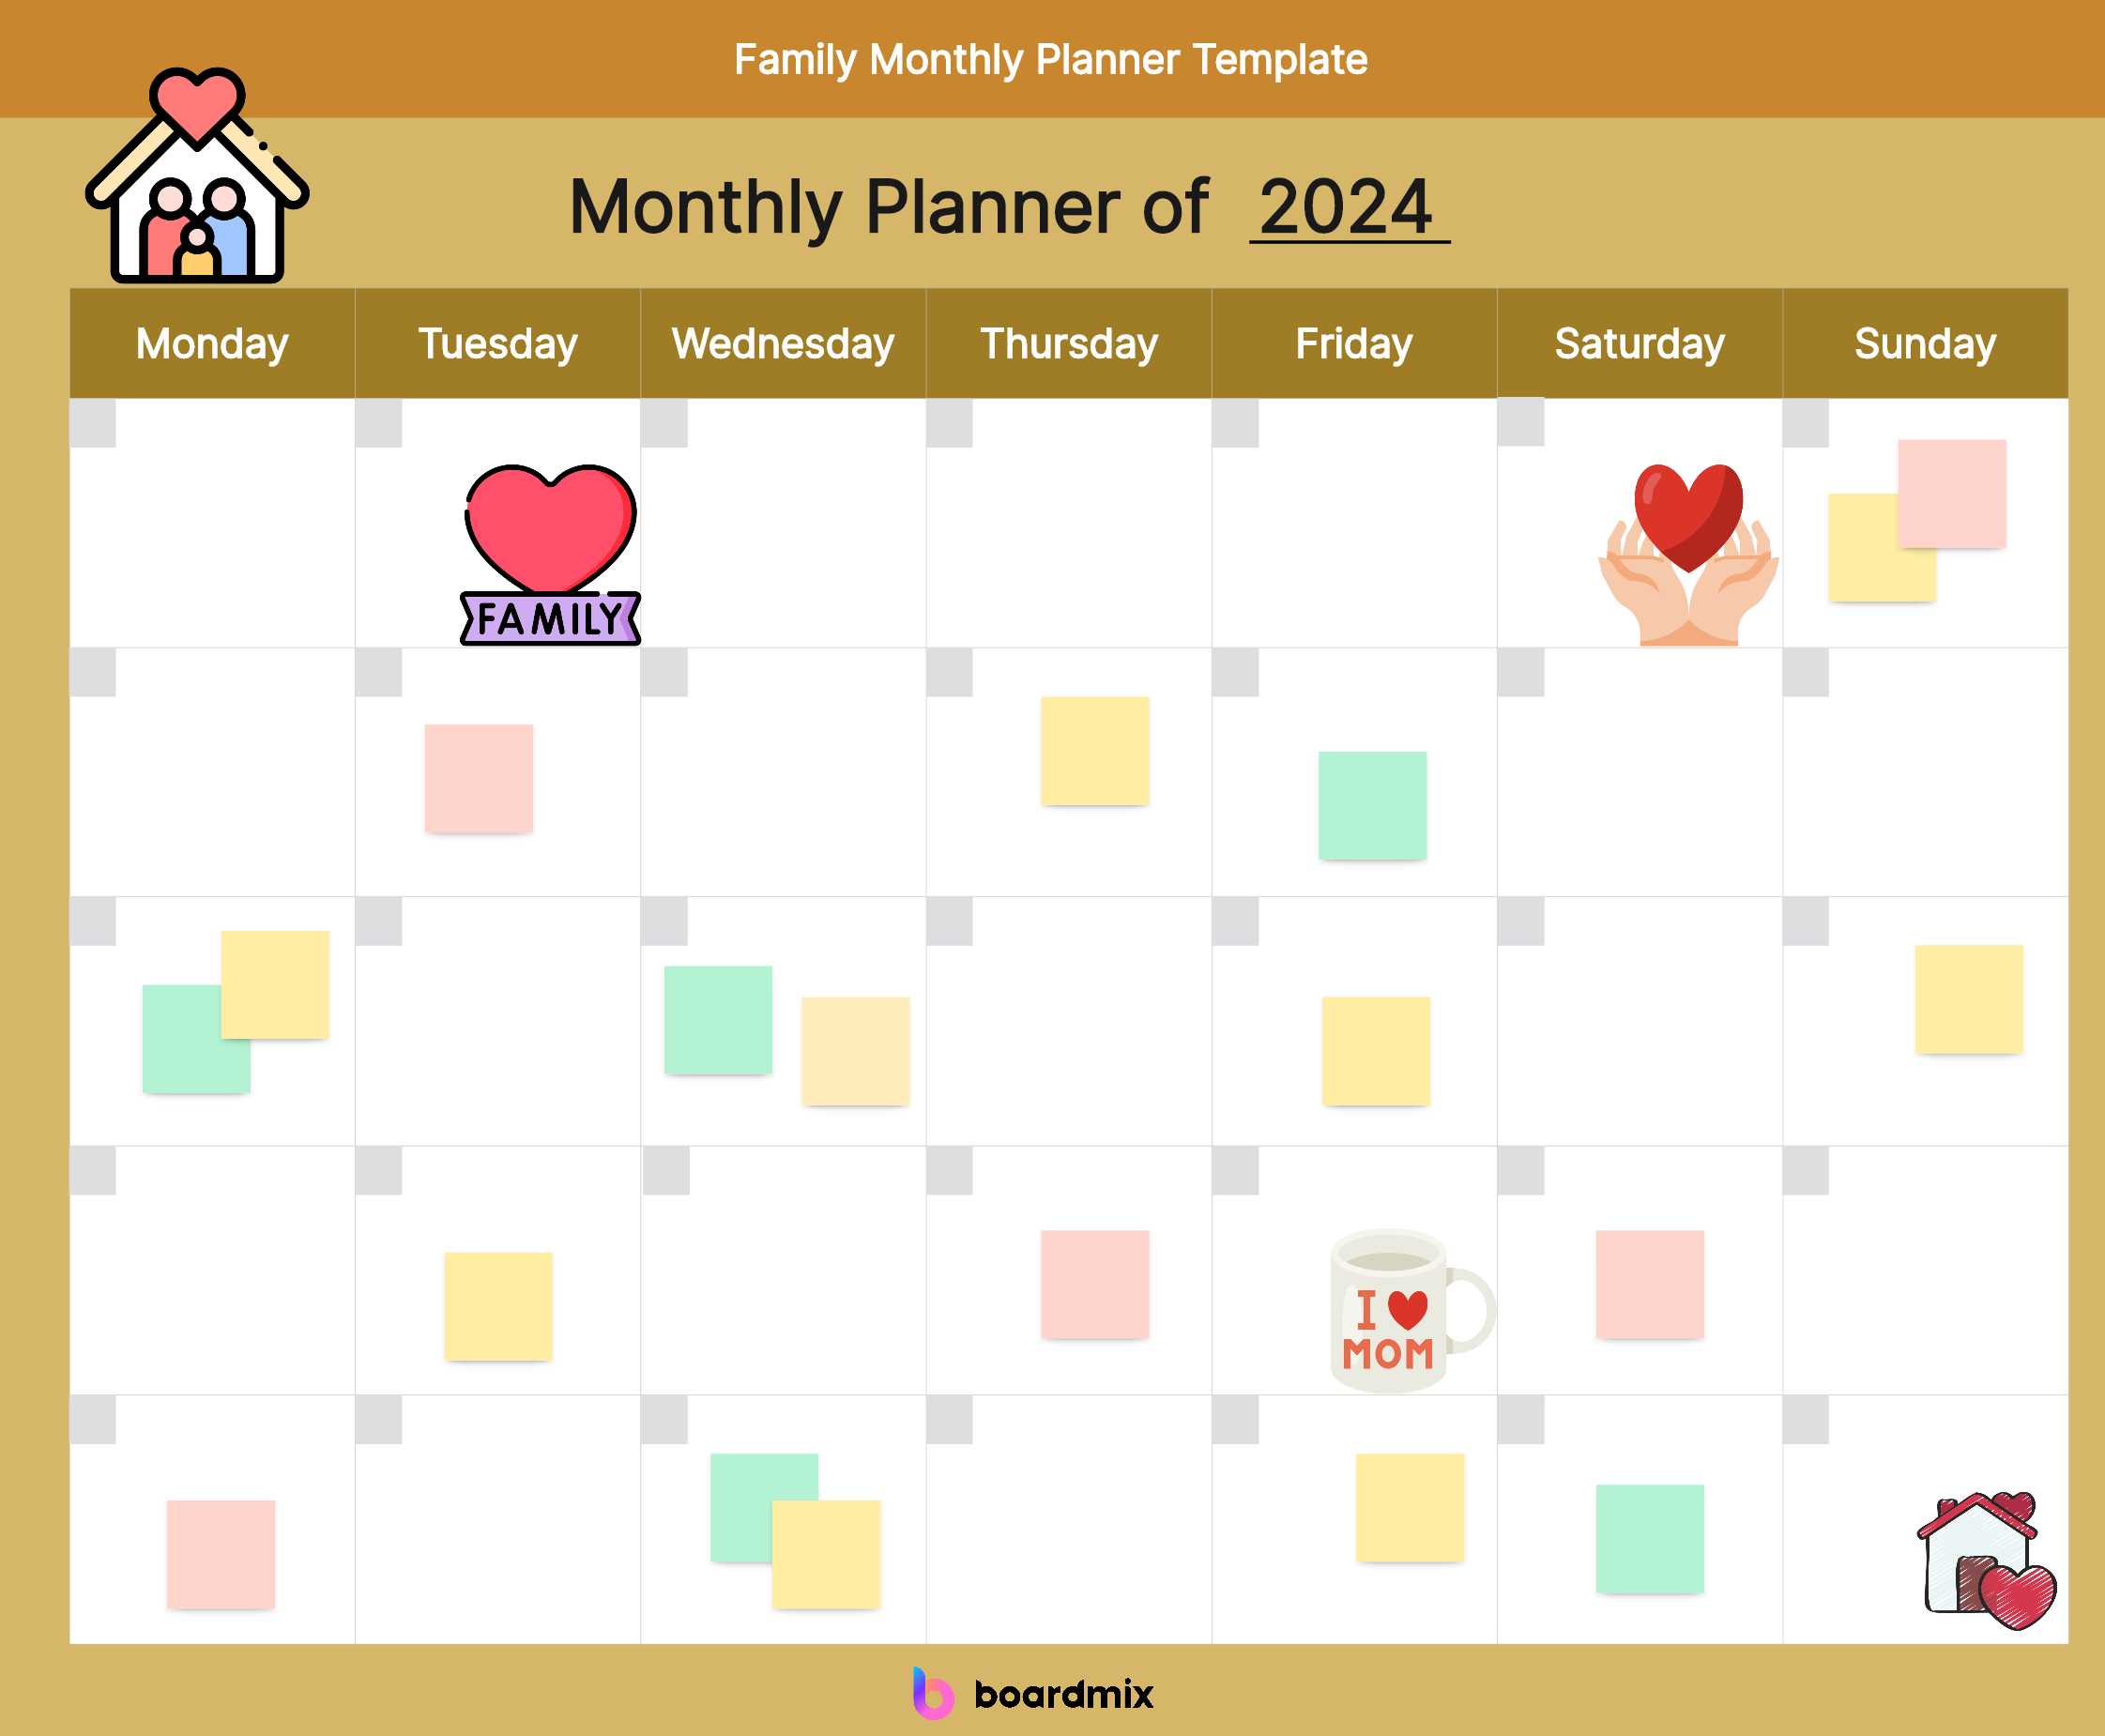 family-monthly-planner-template.png